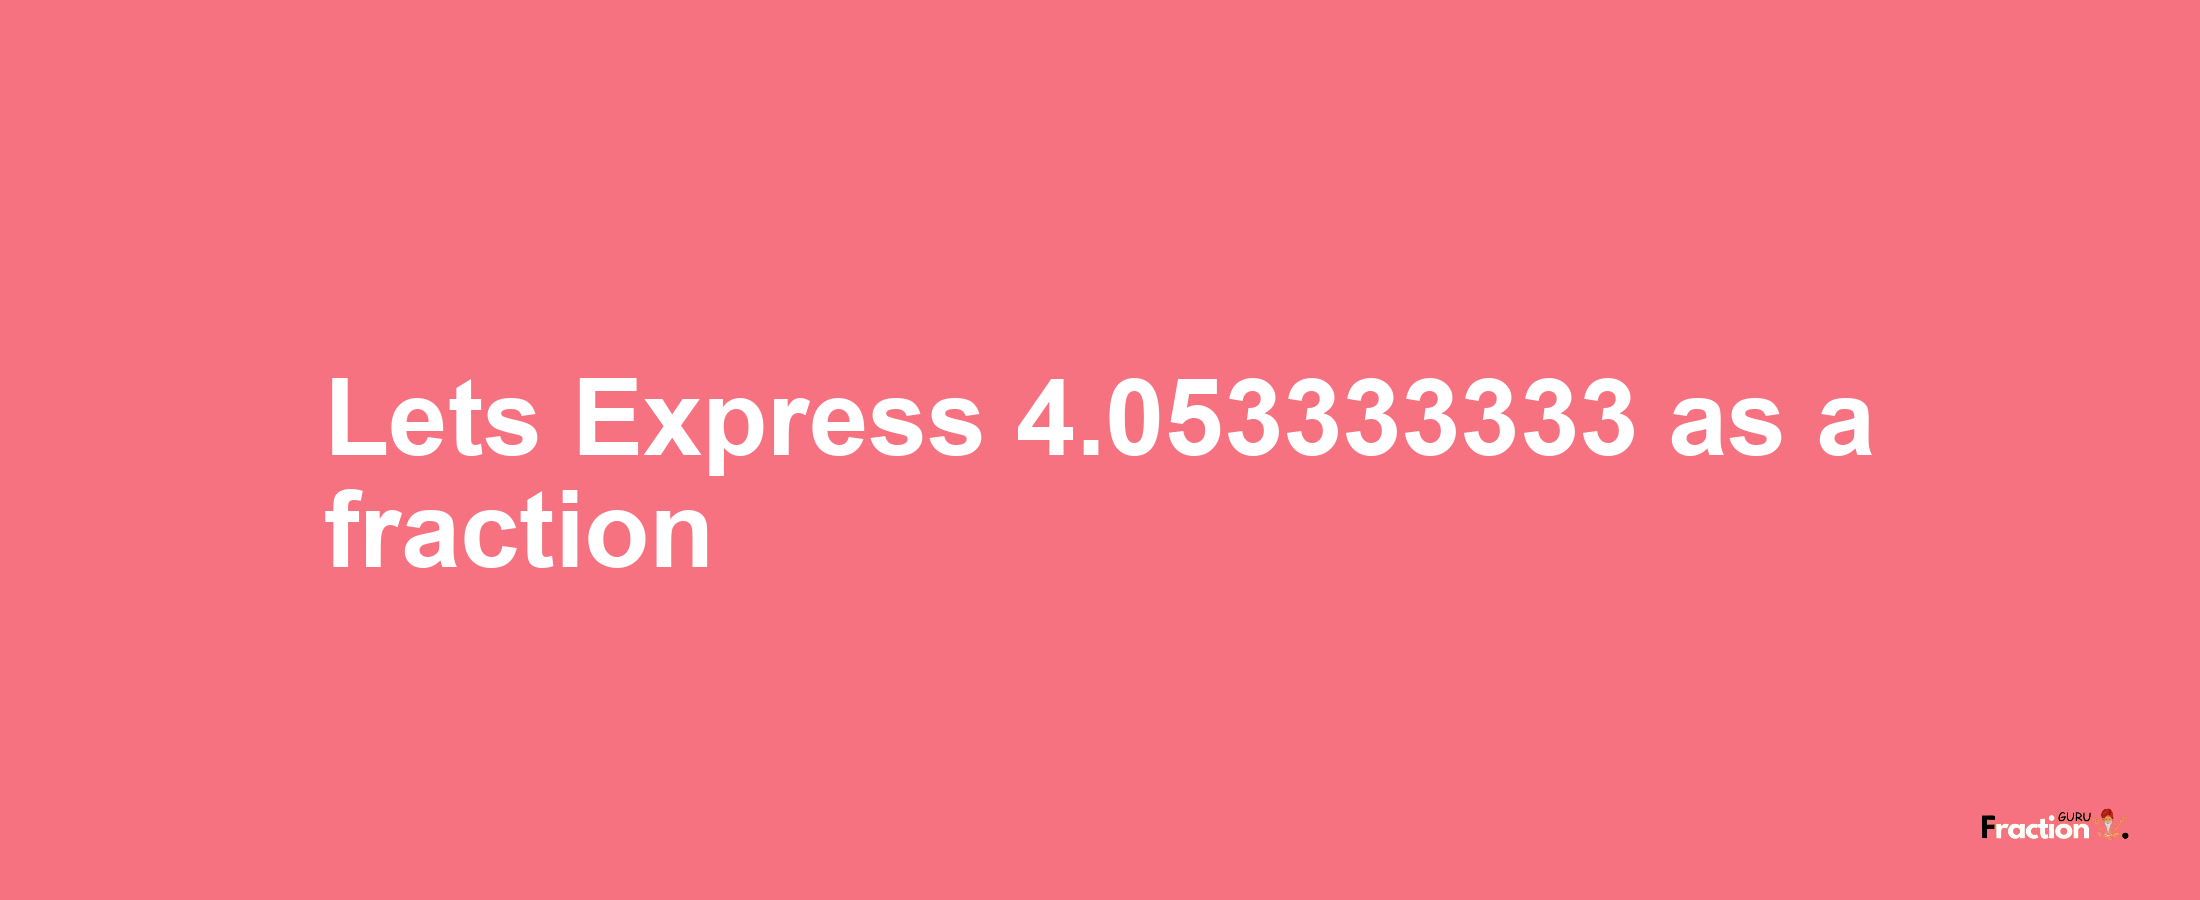 Lets Express 4.053333333 as afraction